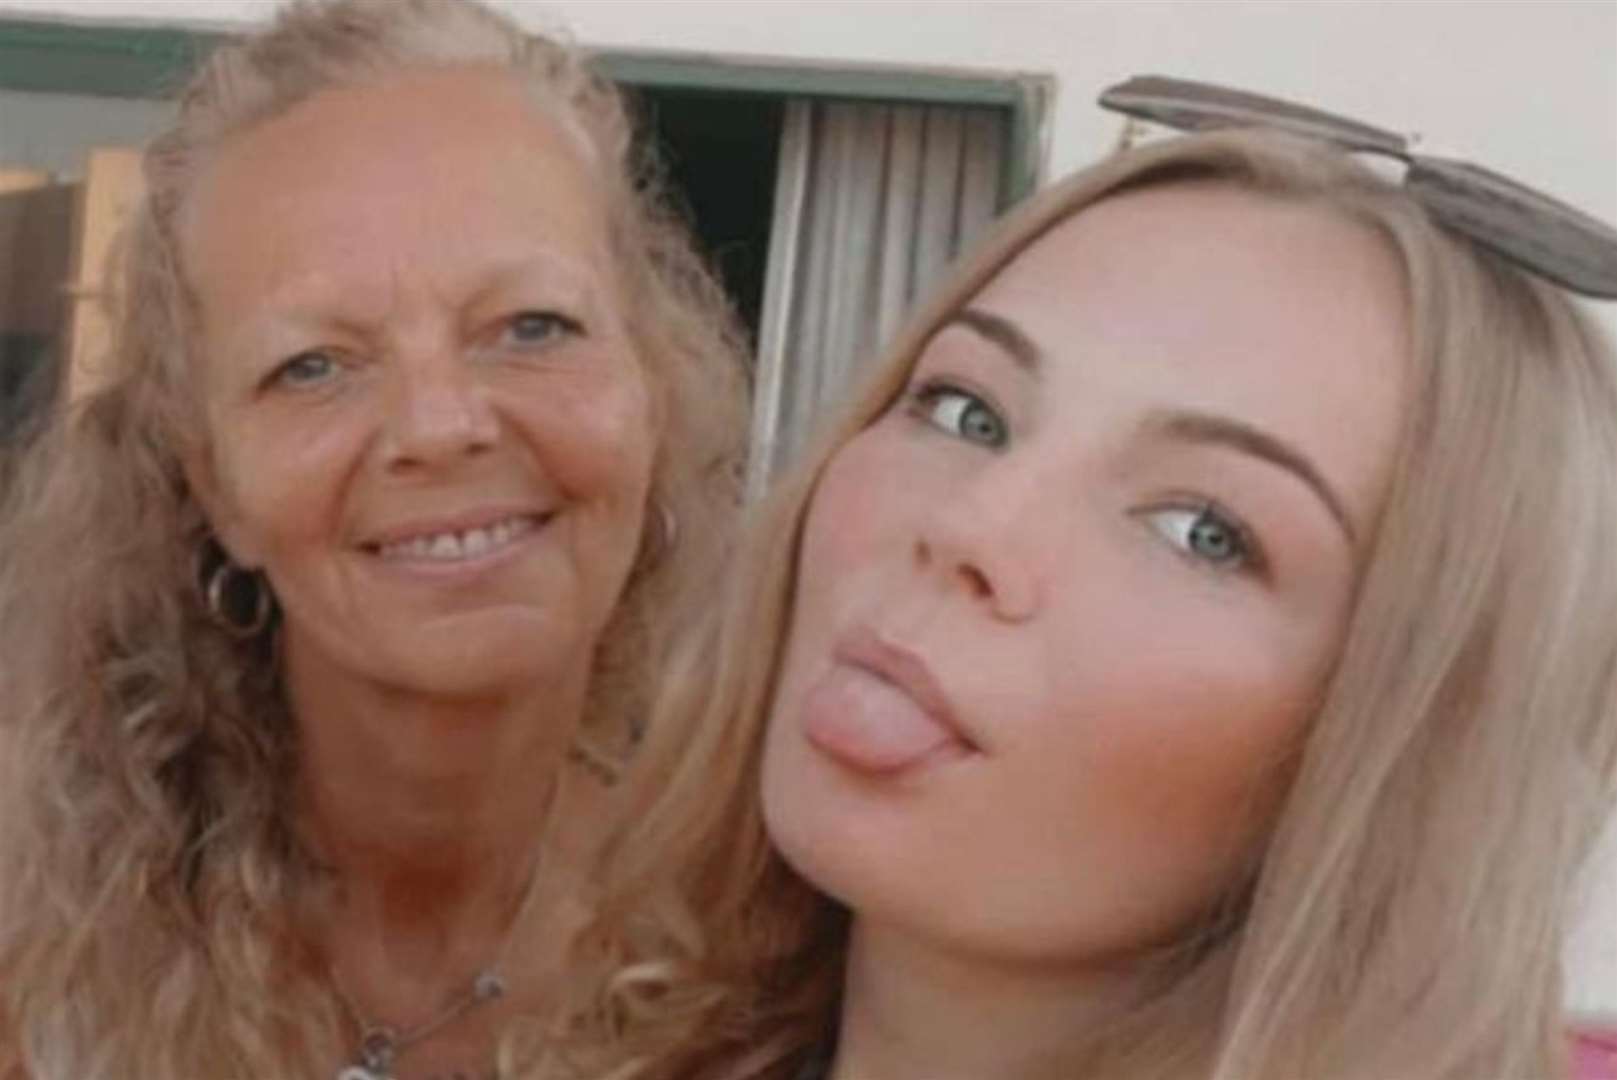 Leah Churchill and Brooke Wanstall, from Canterbury, are believed to have suffered carbon monoxide poisoning